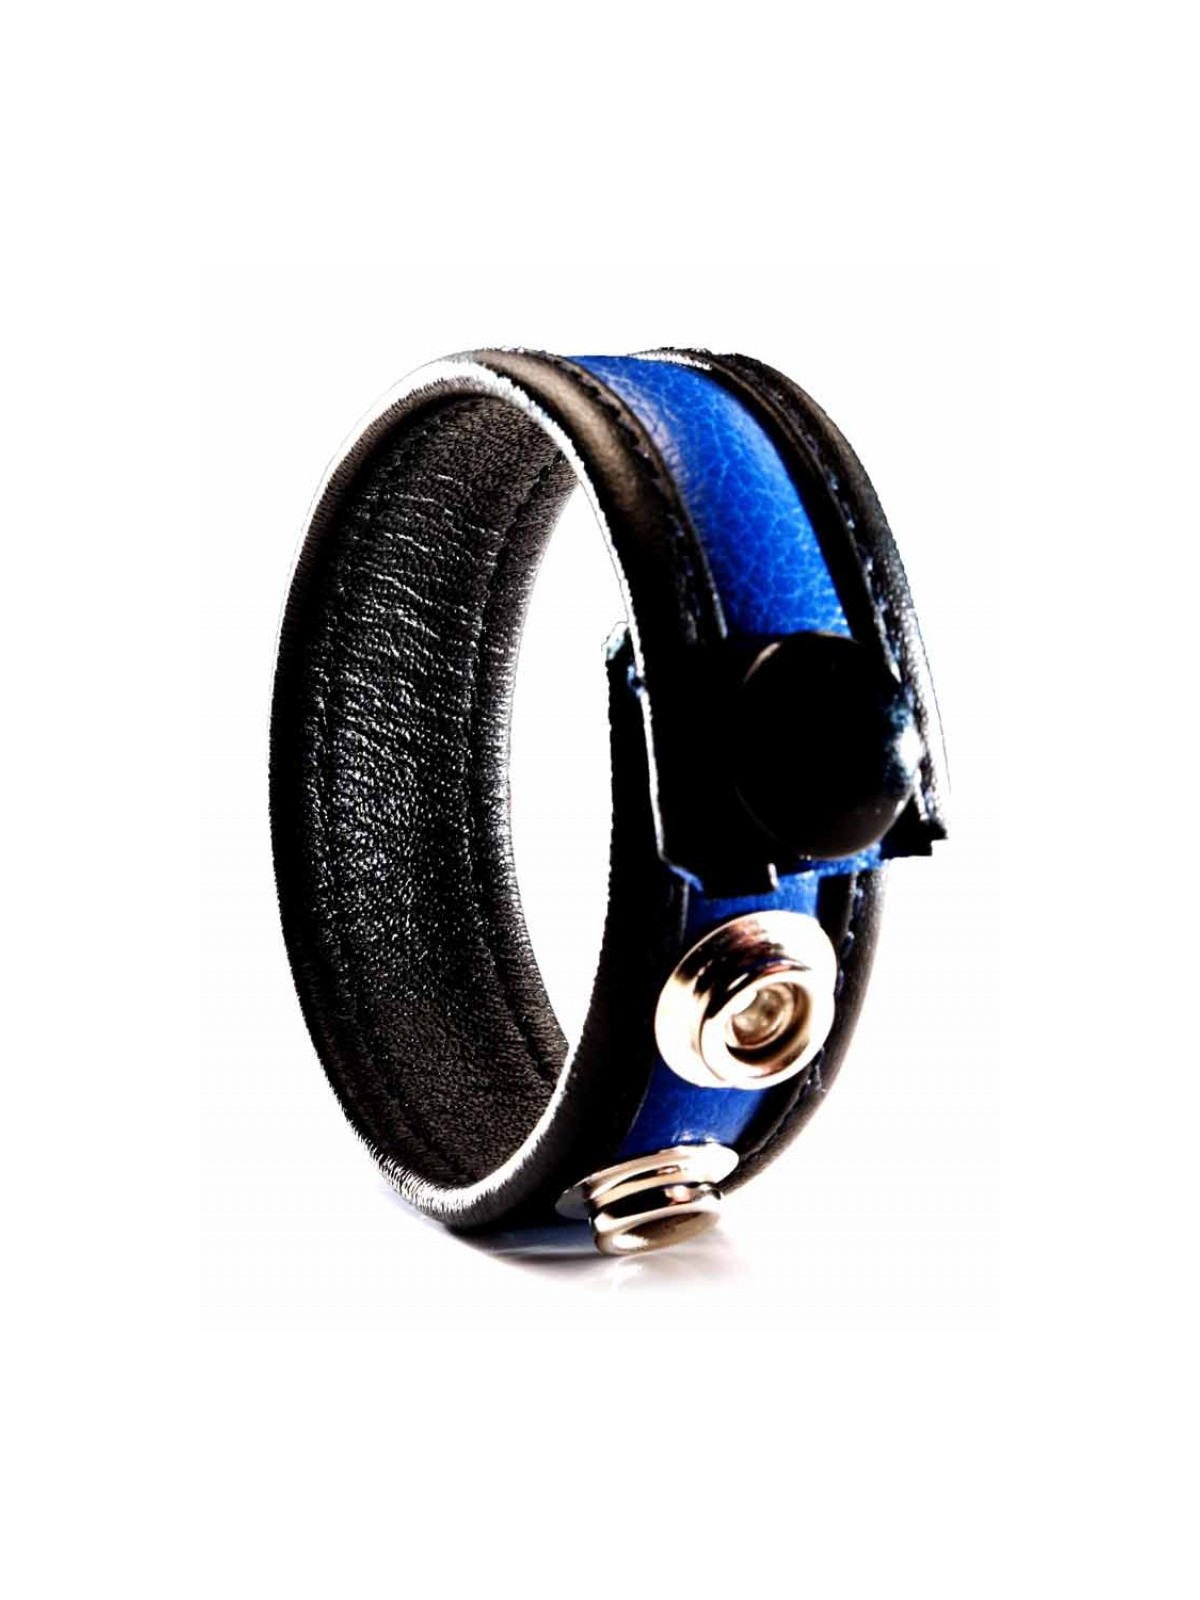 Cockrings Leather  Blue and black bicolor leather cockring. It is pleasant to wear and has a beautiful aesthetic. The 3 pressure